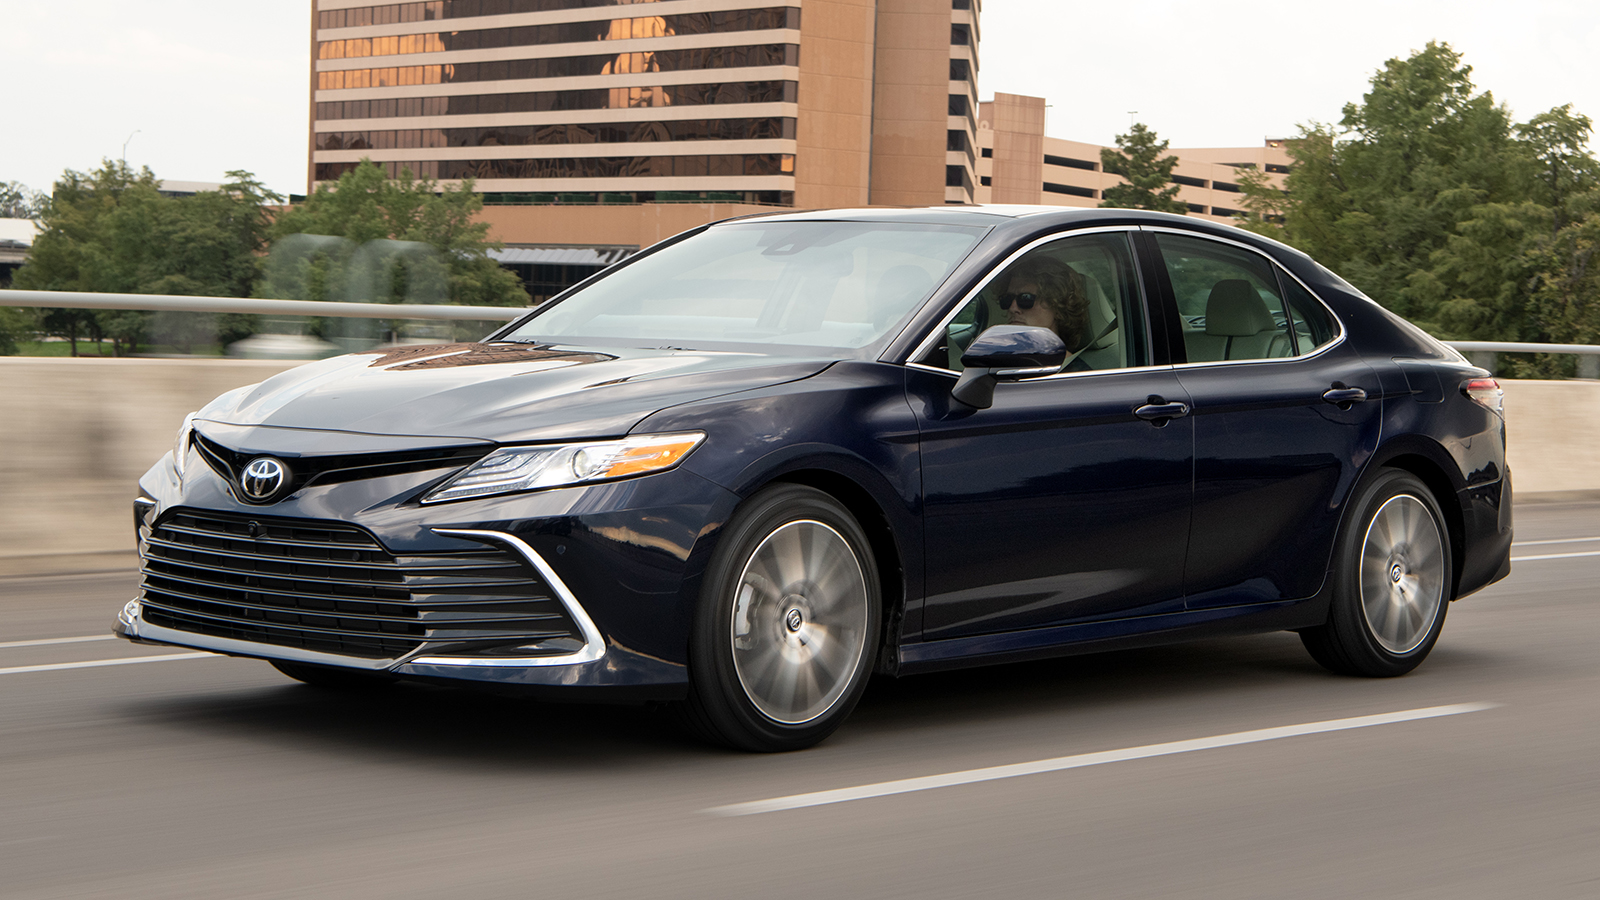 2021 Toyota Camry Review What's new, pictures, hybrid and AWD fuel